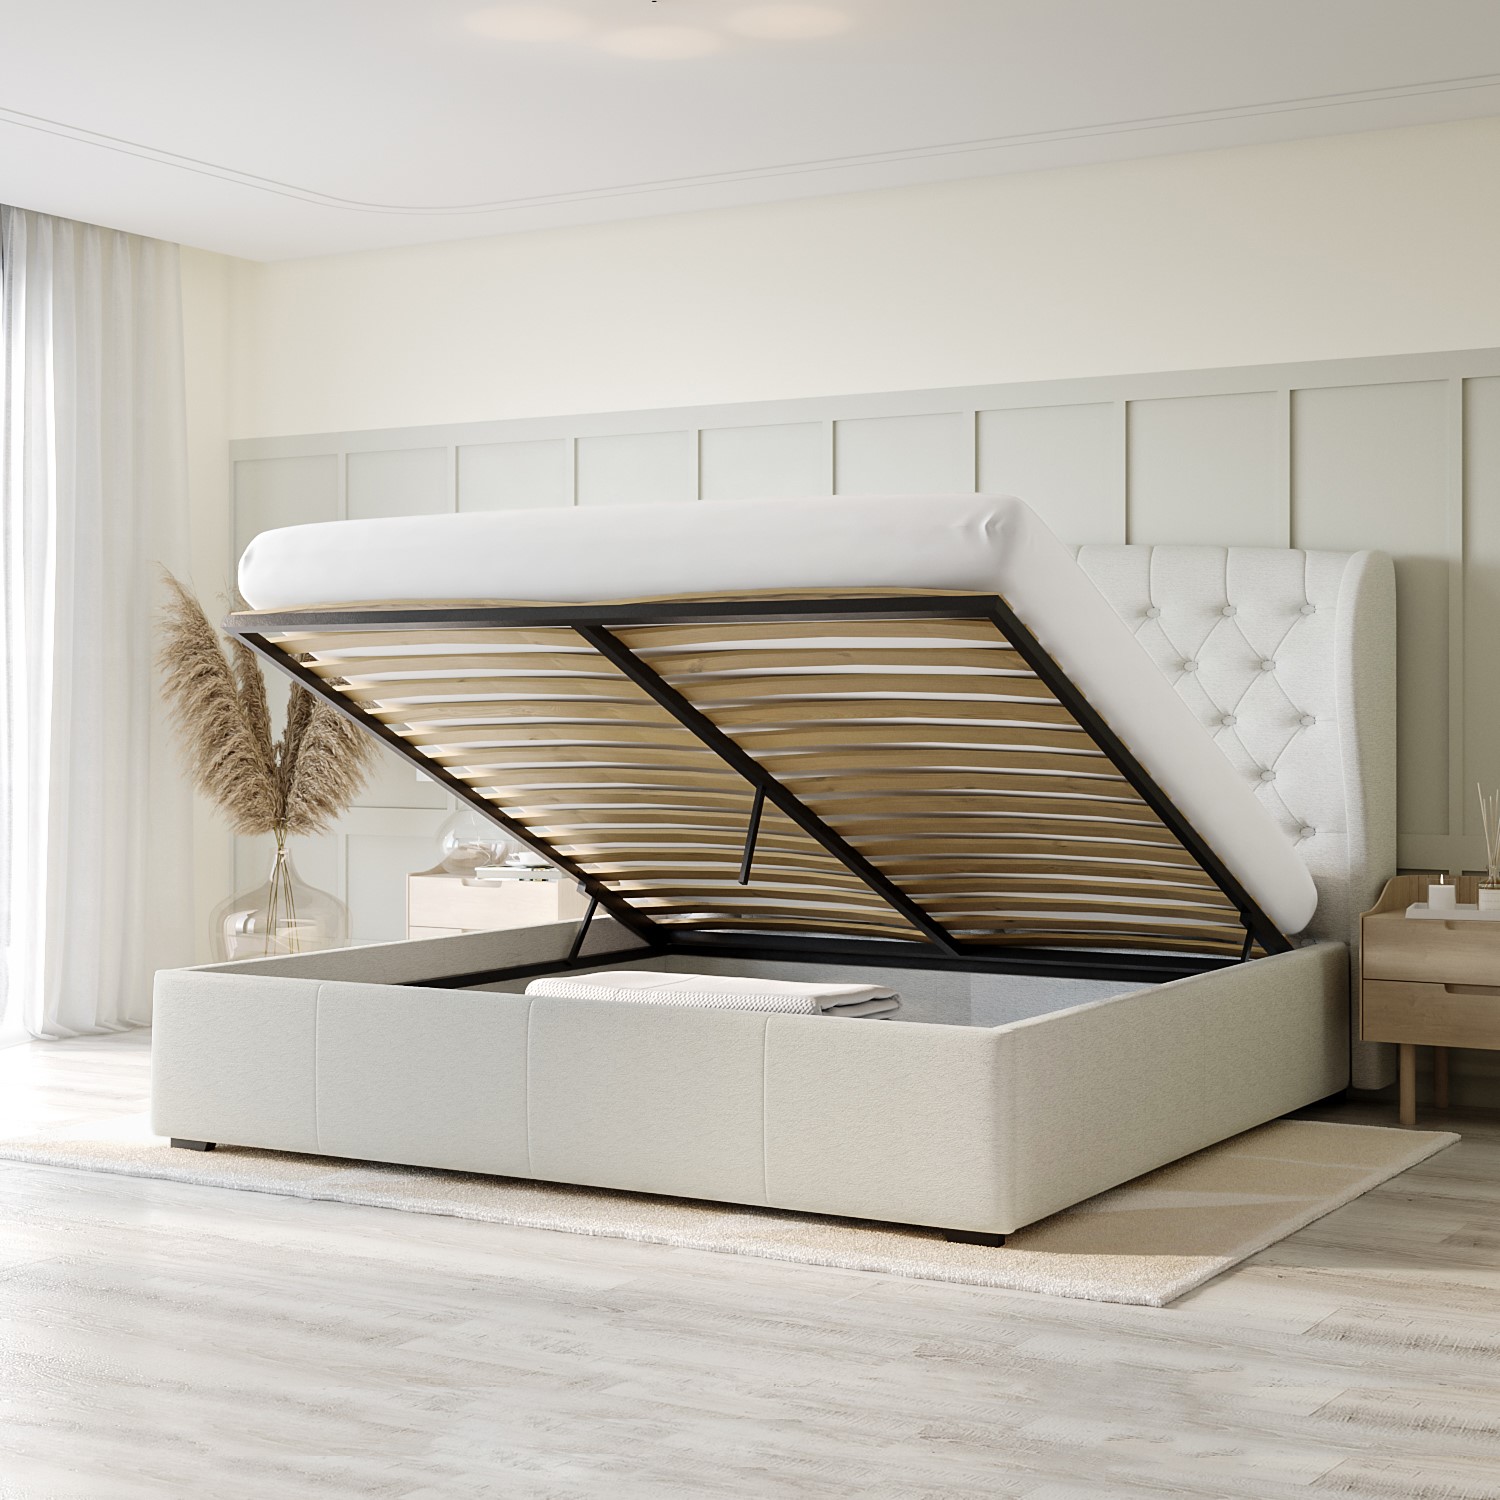 Read more about Cream fabric super king ottoman bed with winged headboard safina